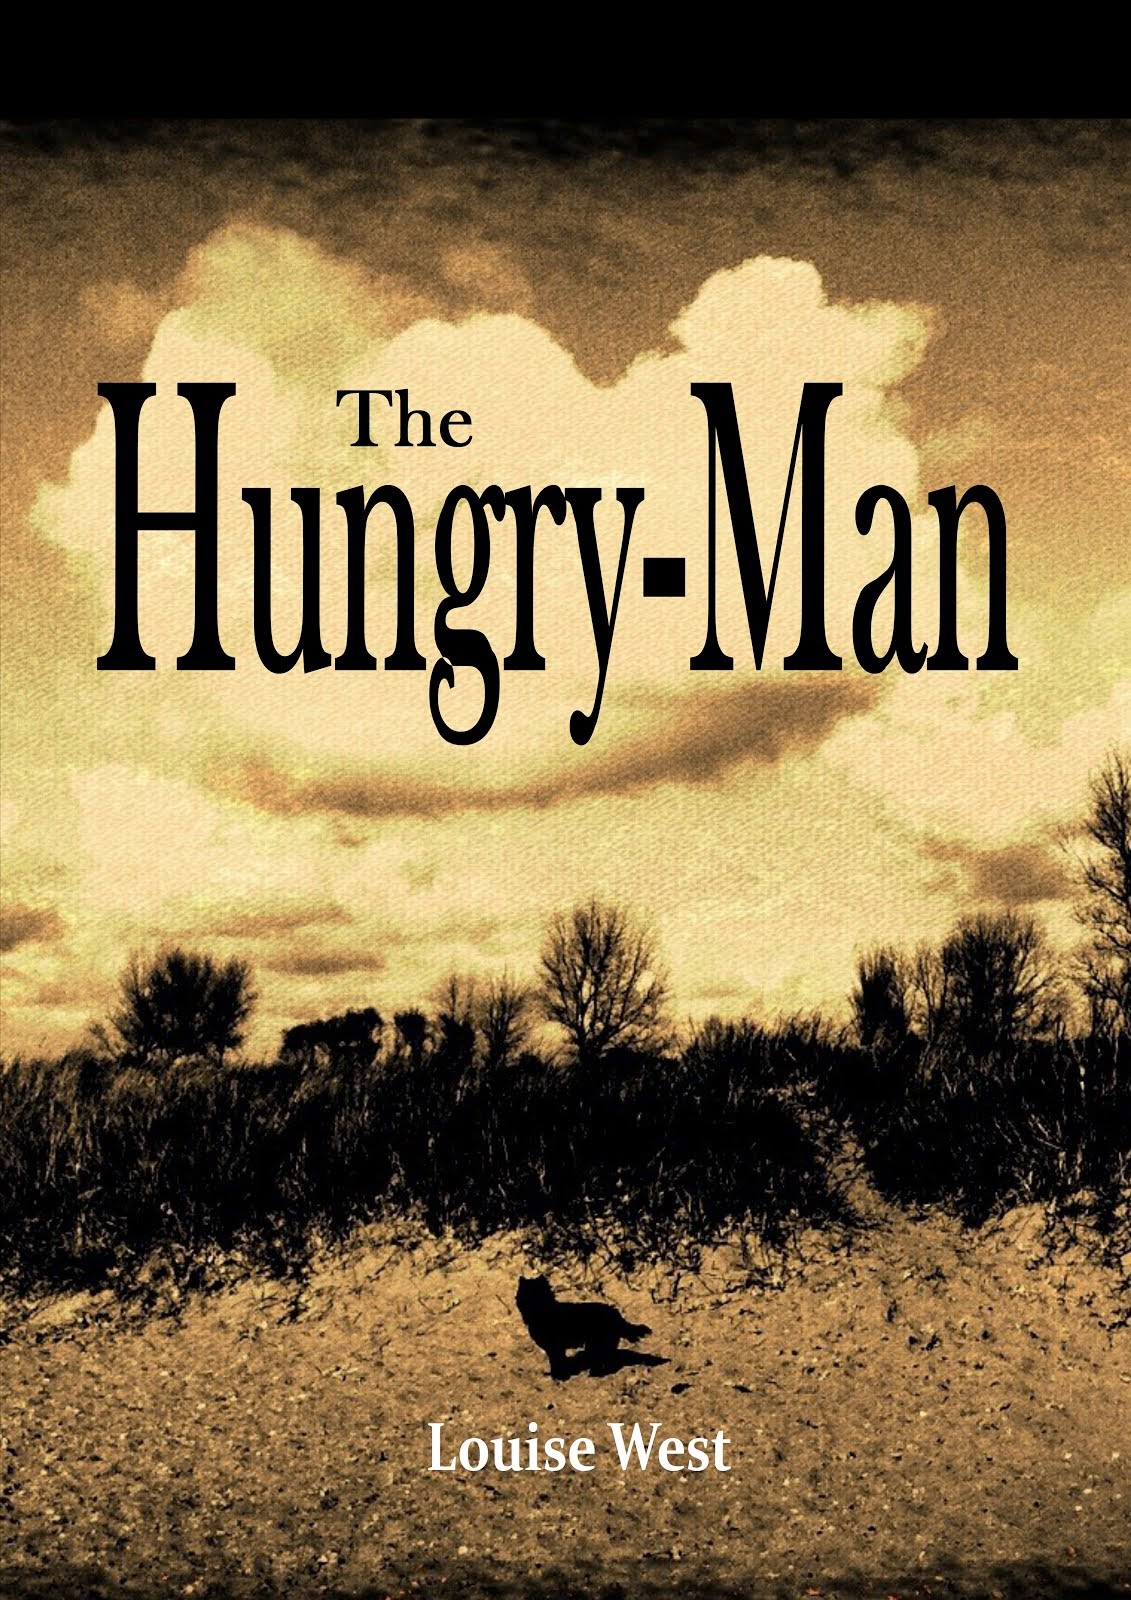 The Hungry-Man